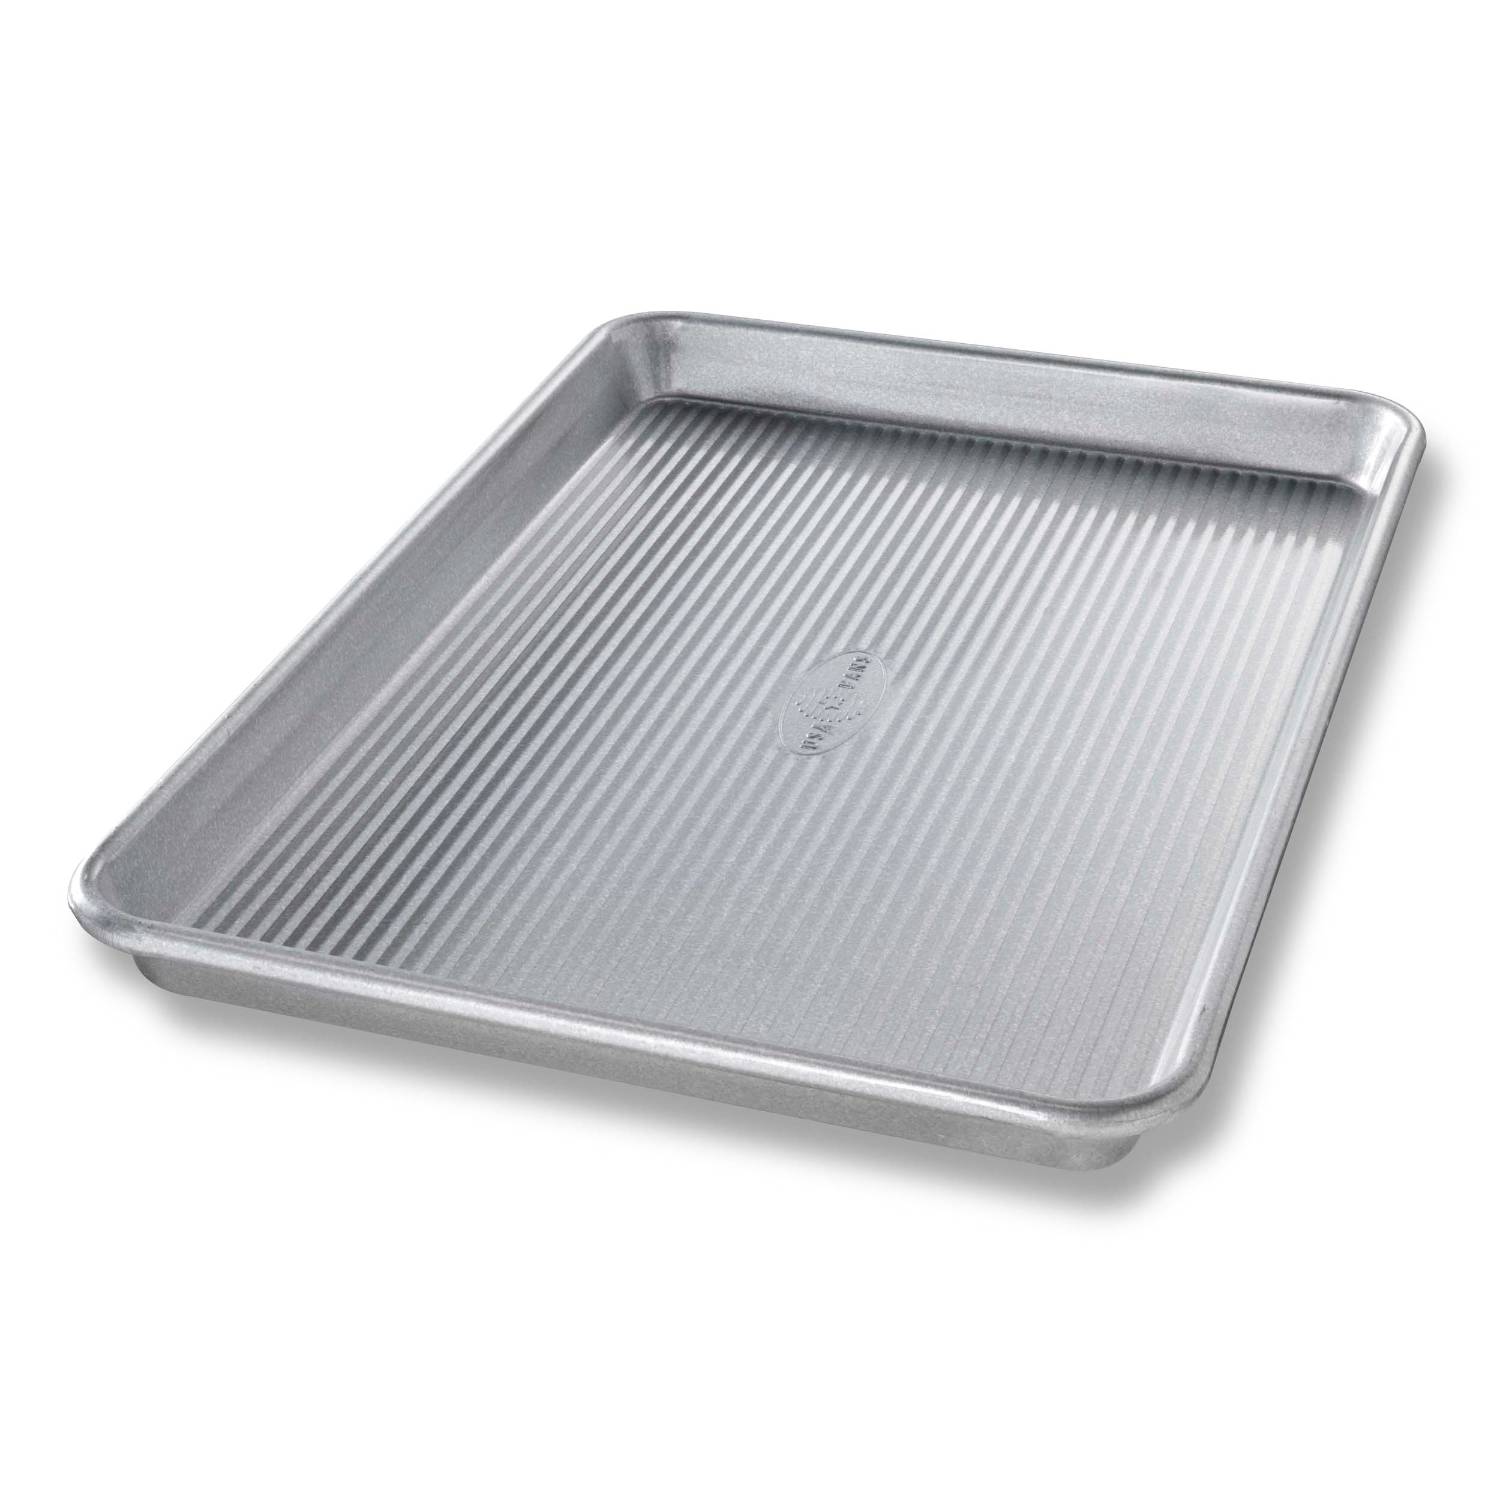 Jelly Roll Pan,9-15/16x14-1/4